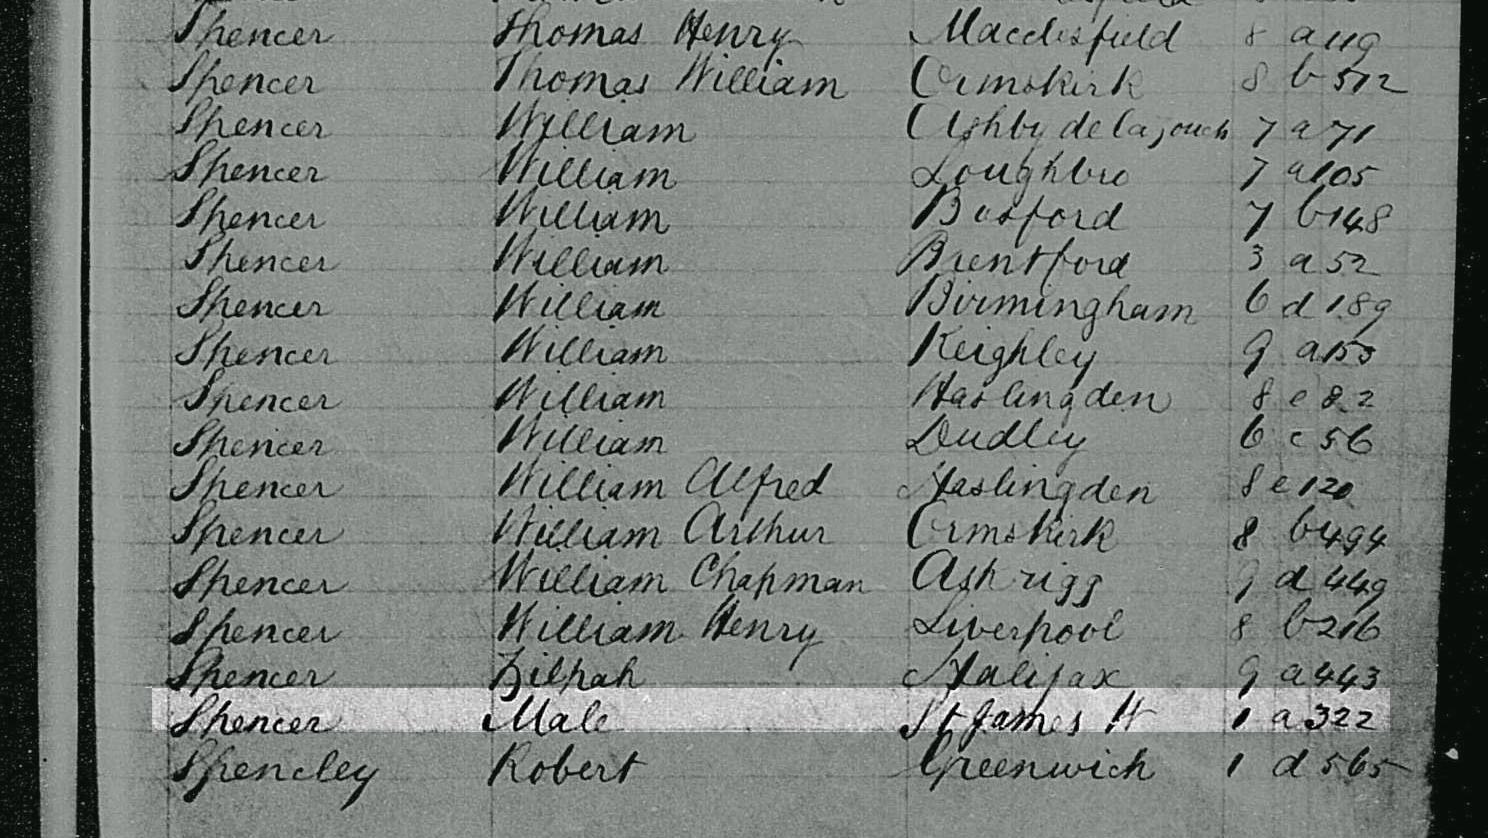 Original 1857 UK birth record for Charles Robert Spencer, accessible from World Vital Records (click to enlarge)